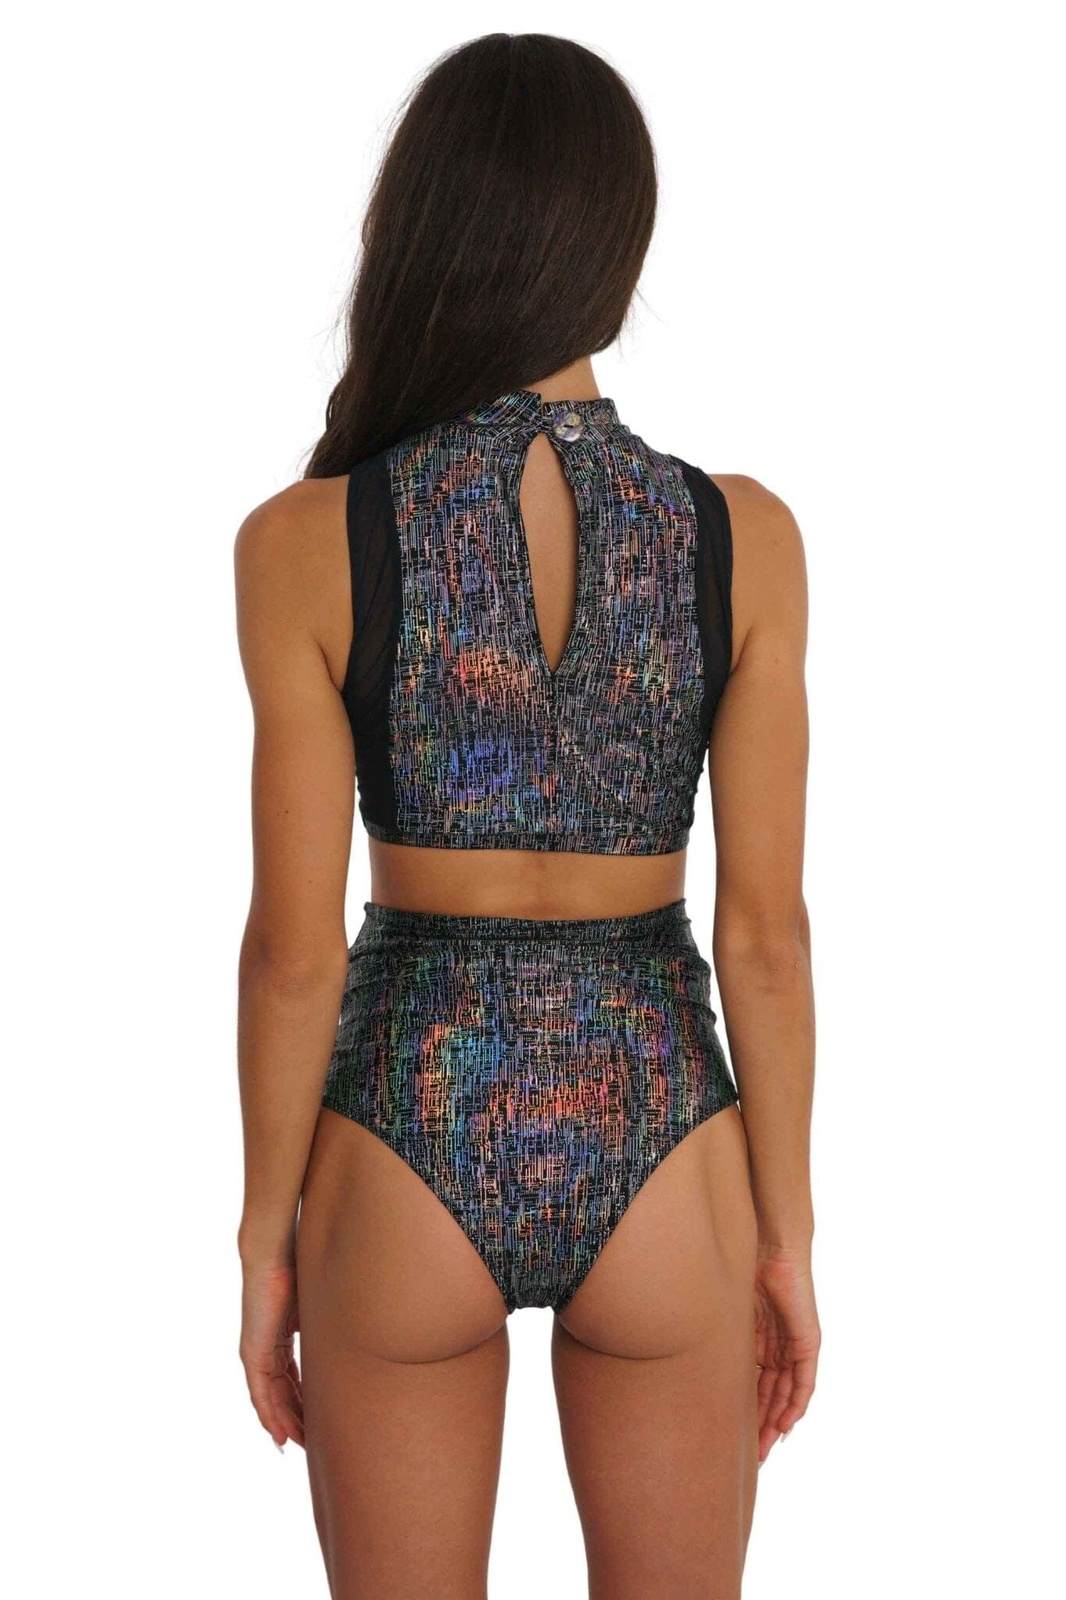 Fantasia keyhole crop top in holographic silver matrix fabric from Love Khaos